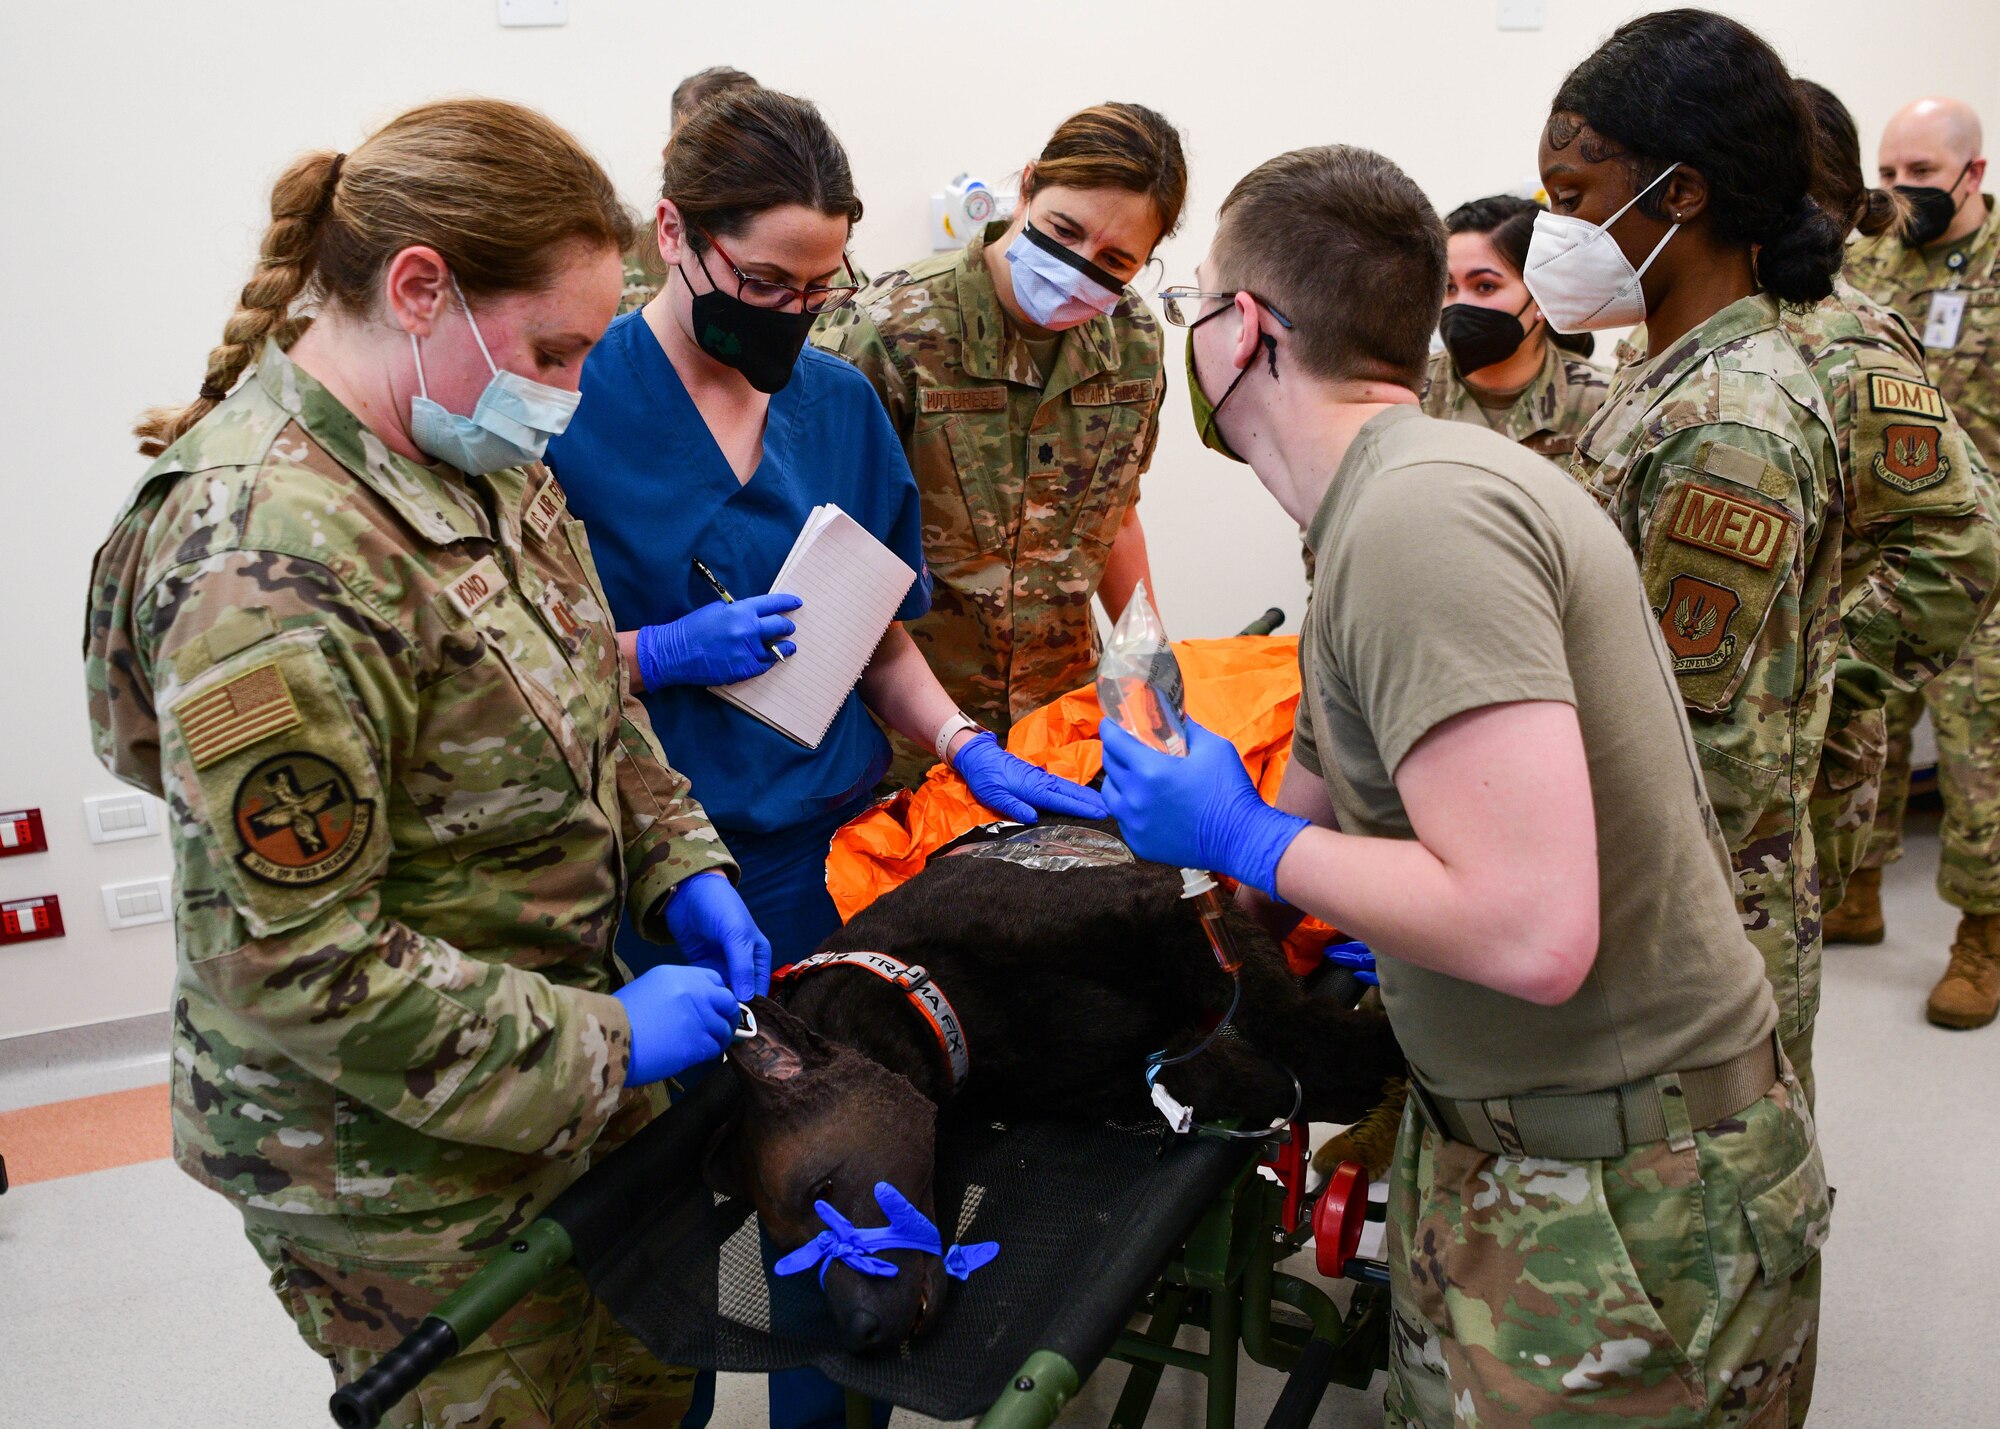 U.S. Air Force Airmen from the 31st Medical Group ‘treat’ a K-9 simulator for simulated wounds during a joint ‘trauma care under fire’ training in the 31st MDG, at Aviano Air Base, Italy, April 12, 2022. The K-9 simulator is a high fidelity training platform designed to provide medics and K-9 handlers the opportunity to practice realistic care for military working K-9s that incur traumatic injuries, whether that be in a deployed area or at home station. (U.S. Air Force photo by Senior Airman Brooke Moeder)